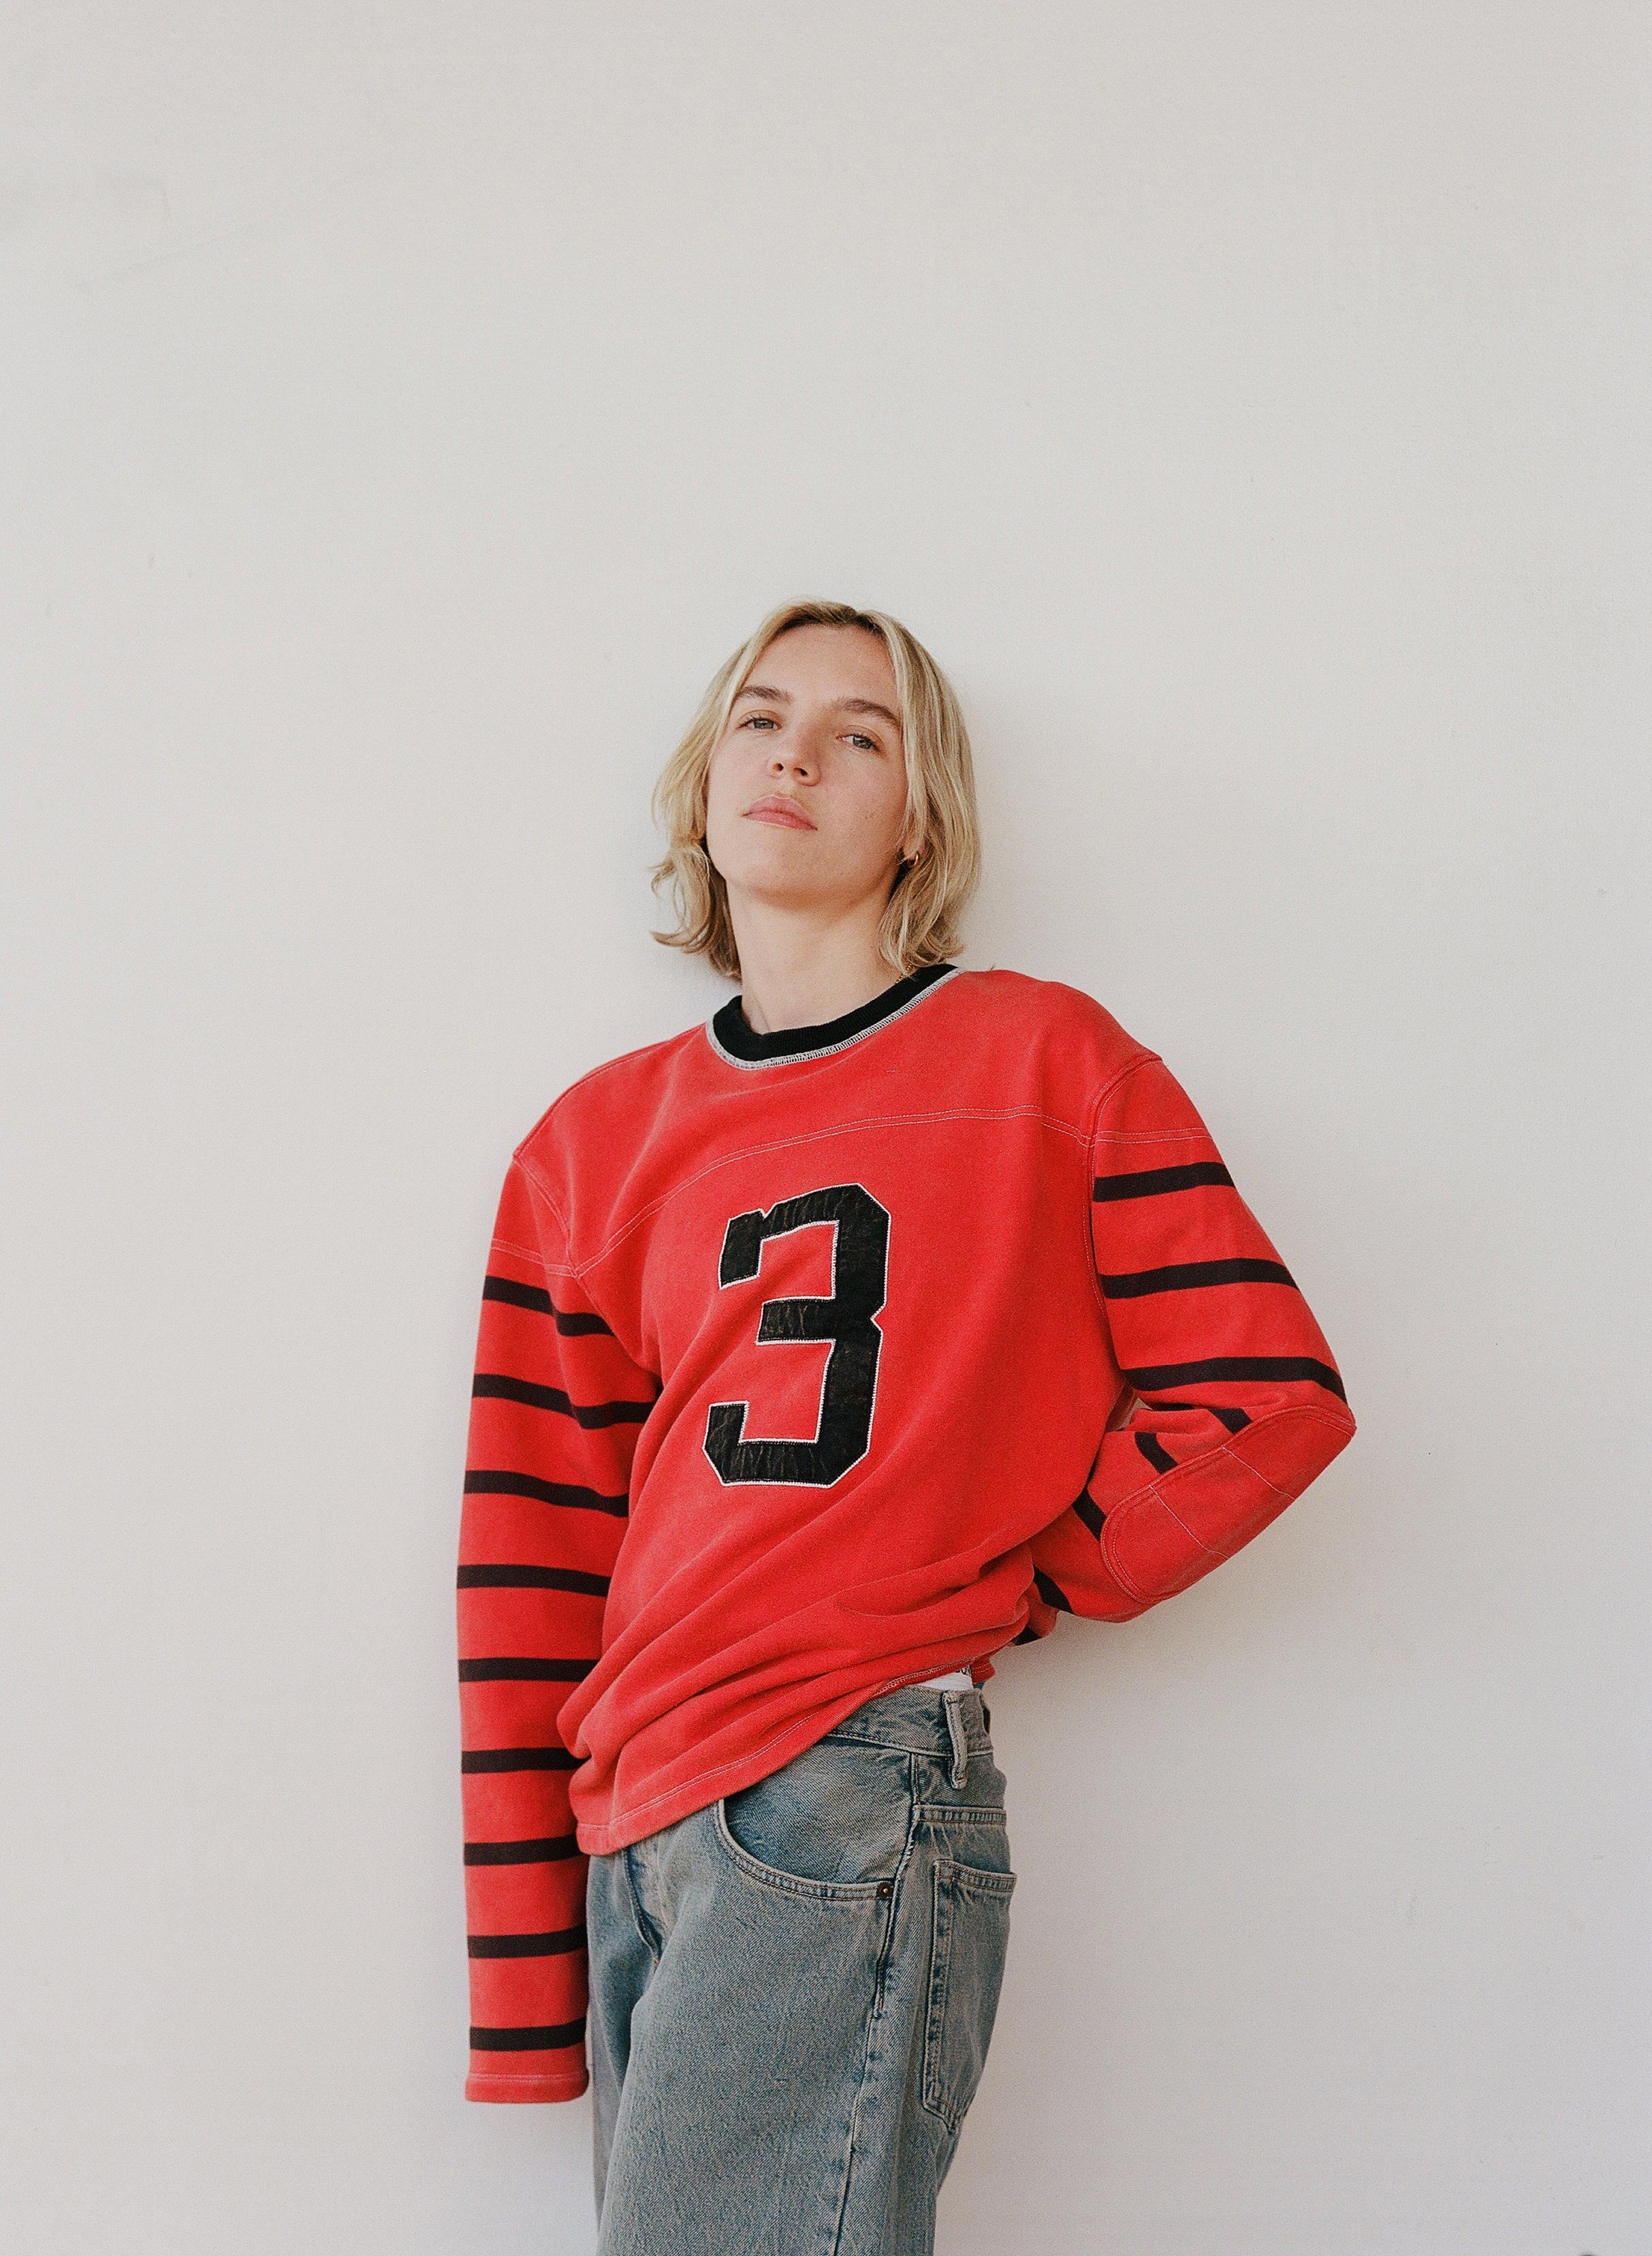 The Japanese House in New York promo photo for Ticketmaster presale offer code